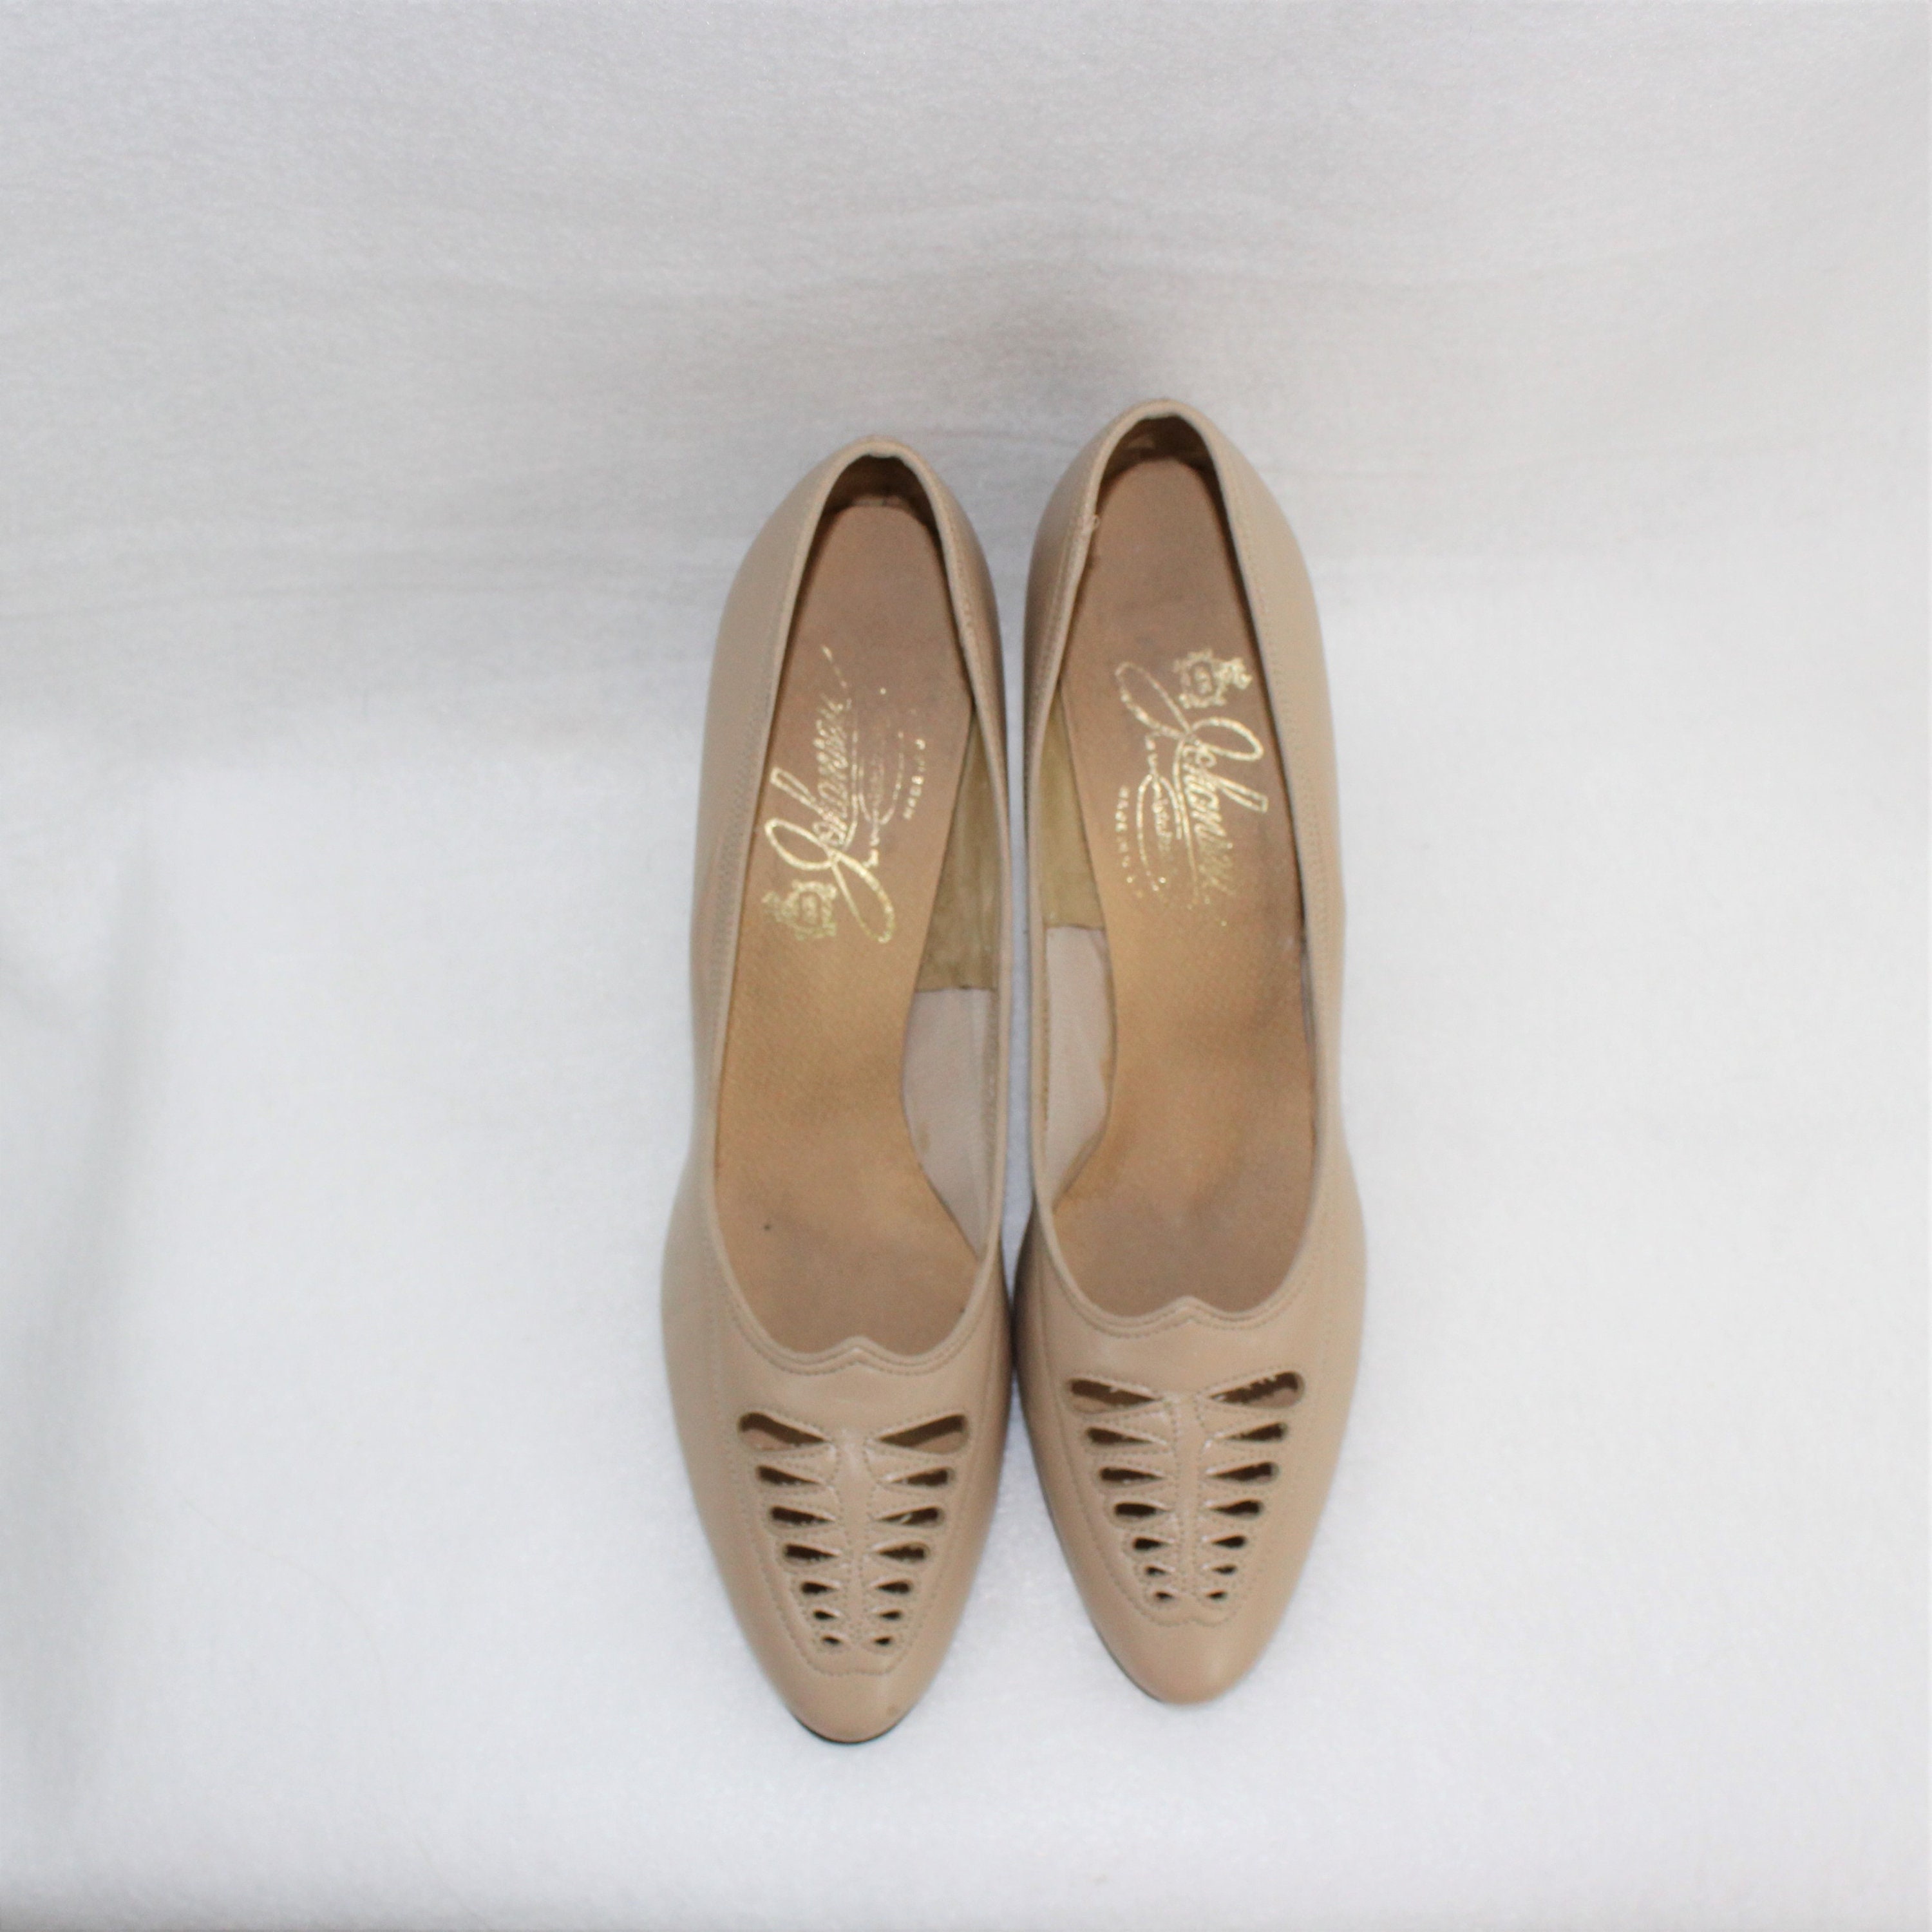 Women's Leather Tan Shoes in Size 8 AA 